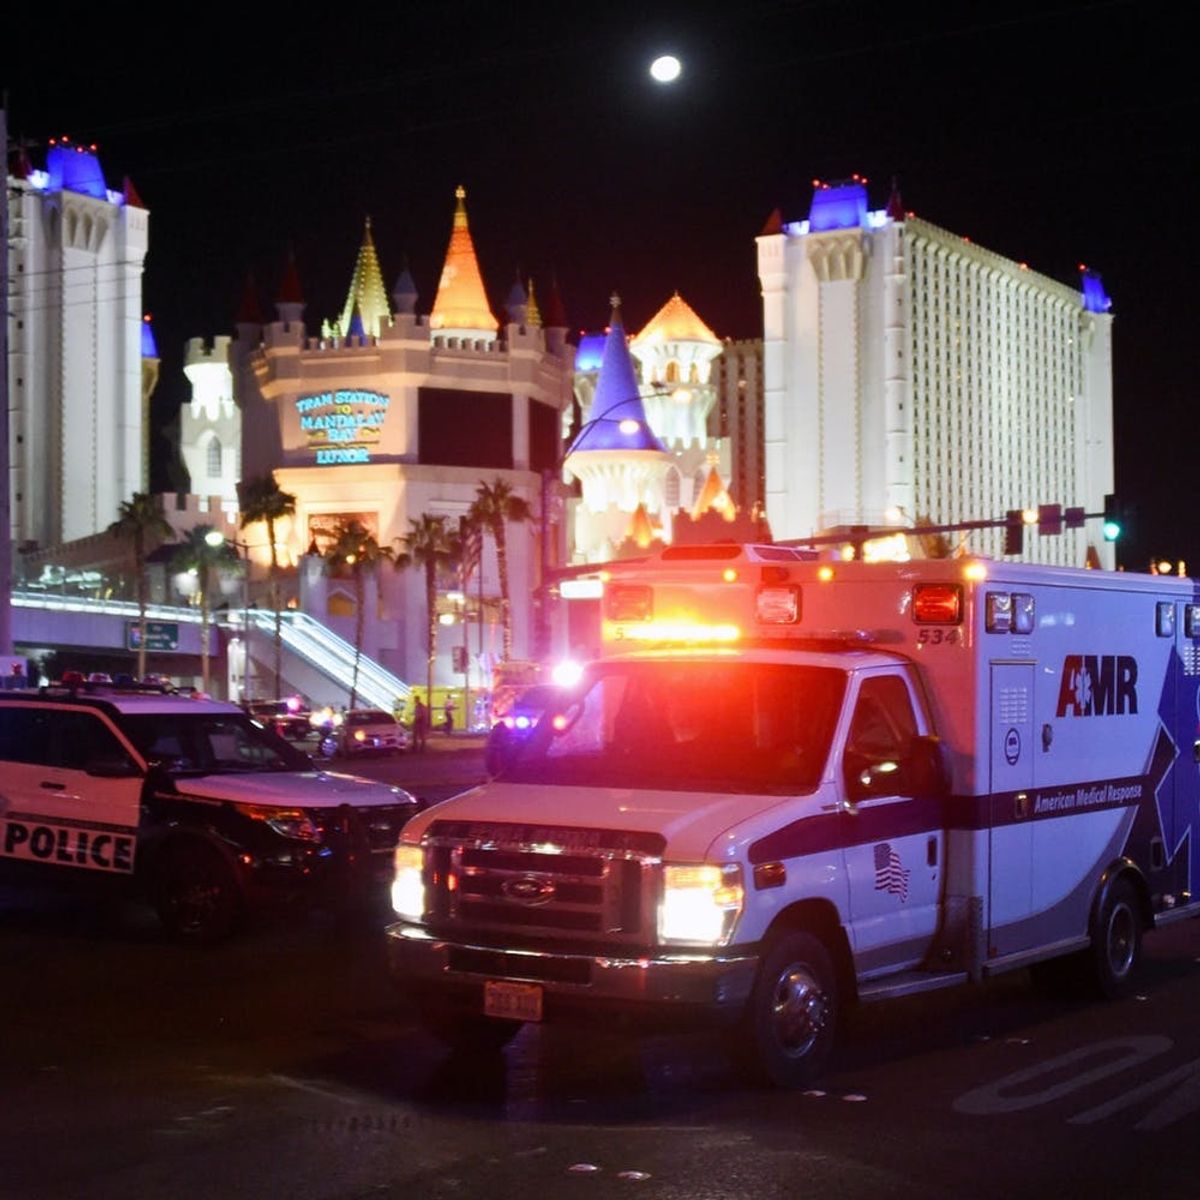 Here’s How to Help the Victims of the Las Vegas Shooting